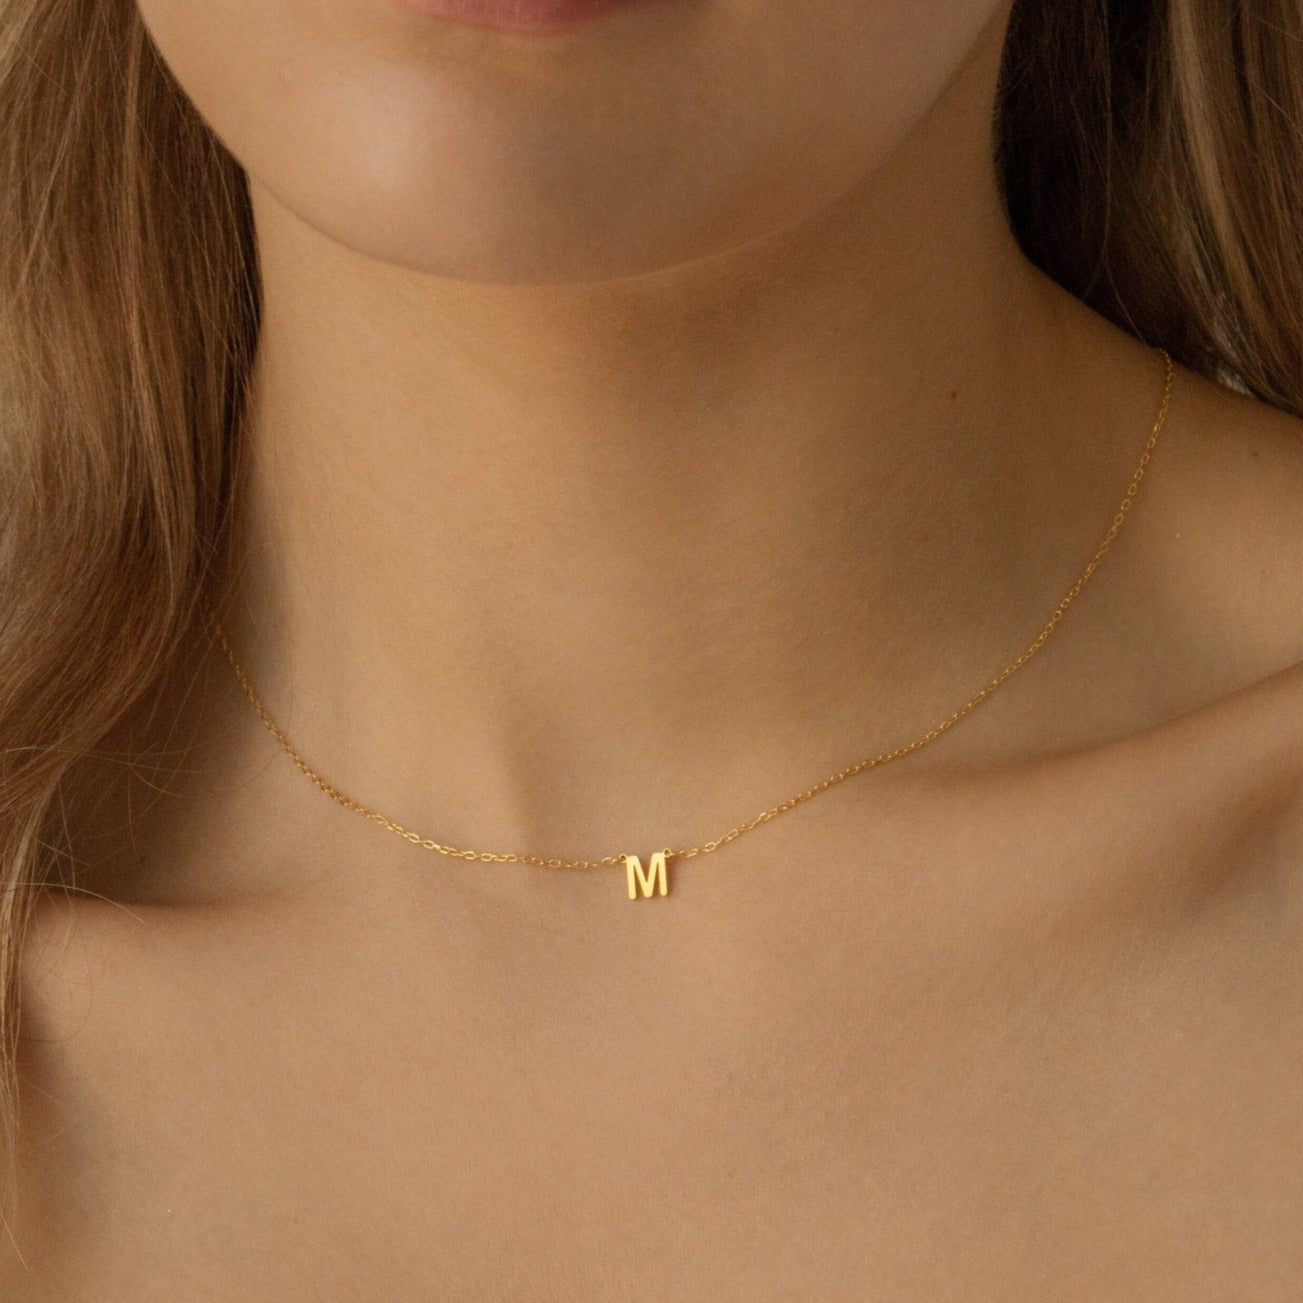 Buy Alice Initial Necklace - Gold Letter M Necklace - Simple and Elegant Design - Perfect for Daily Wear - Shop Best-Selling Jewelry at CaitlynMinimalist.com